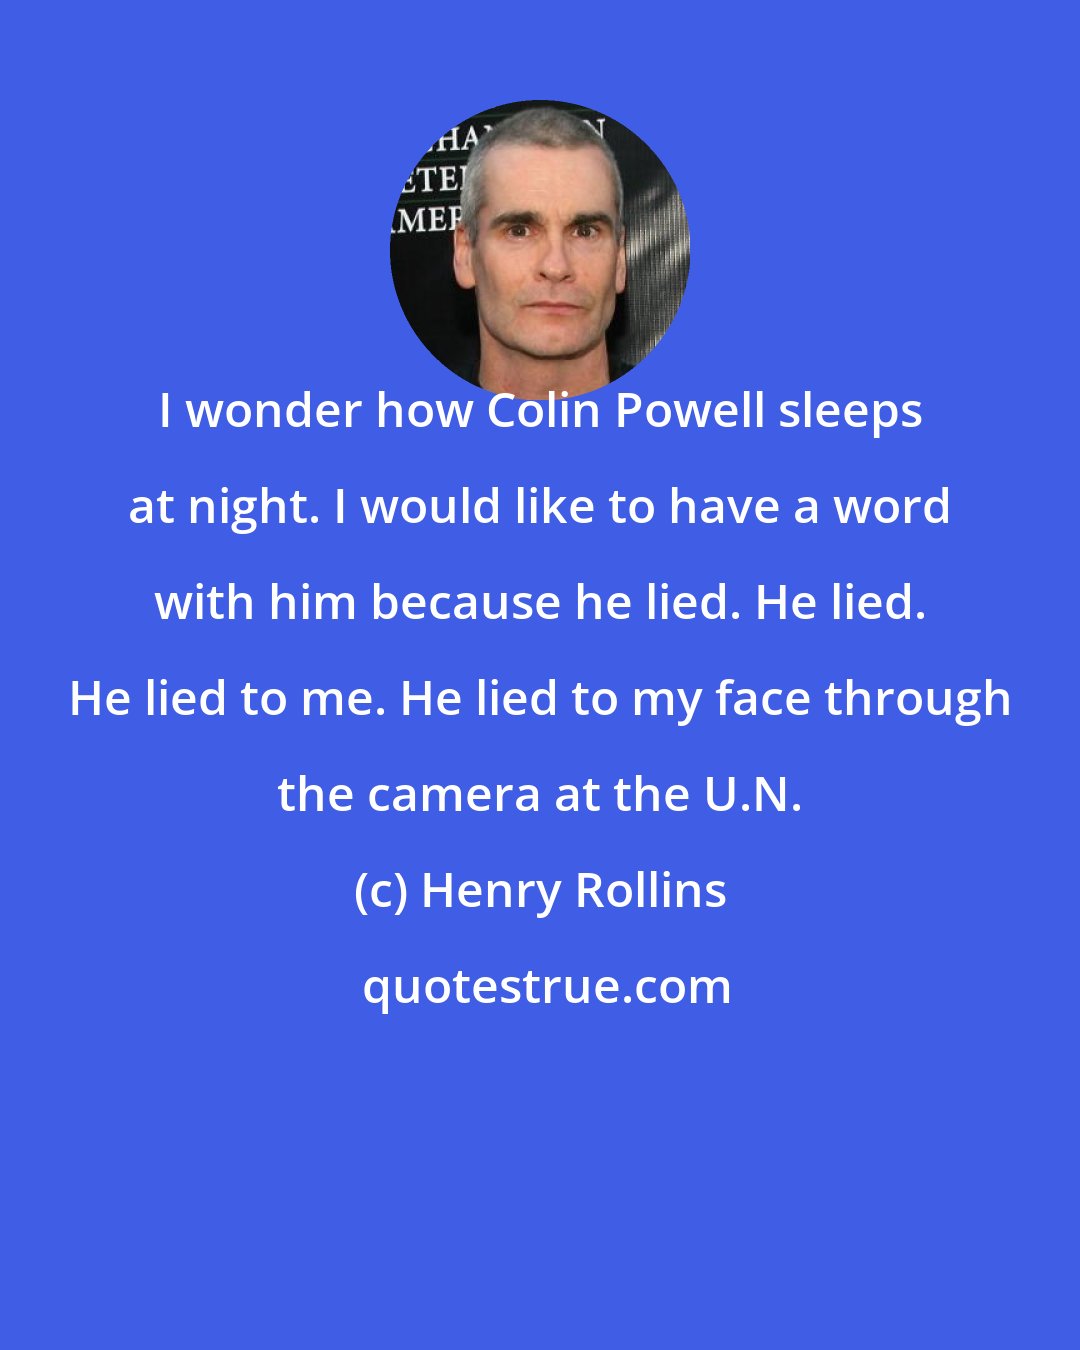 Henry Rollins: I wonder how Colin Powell sleeps at night. I would like to have a word with him because he lied. He lied. He lied to me. He lied to my face through the camera at the U.N.